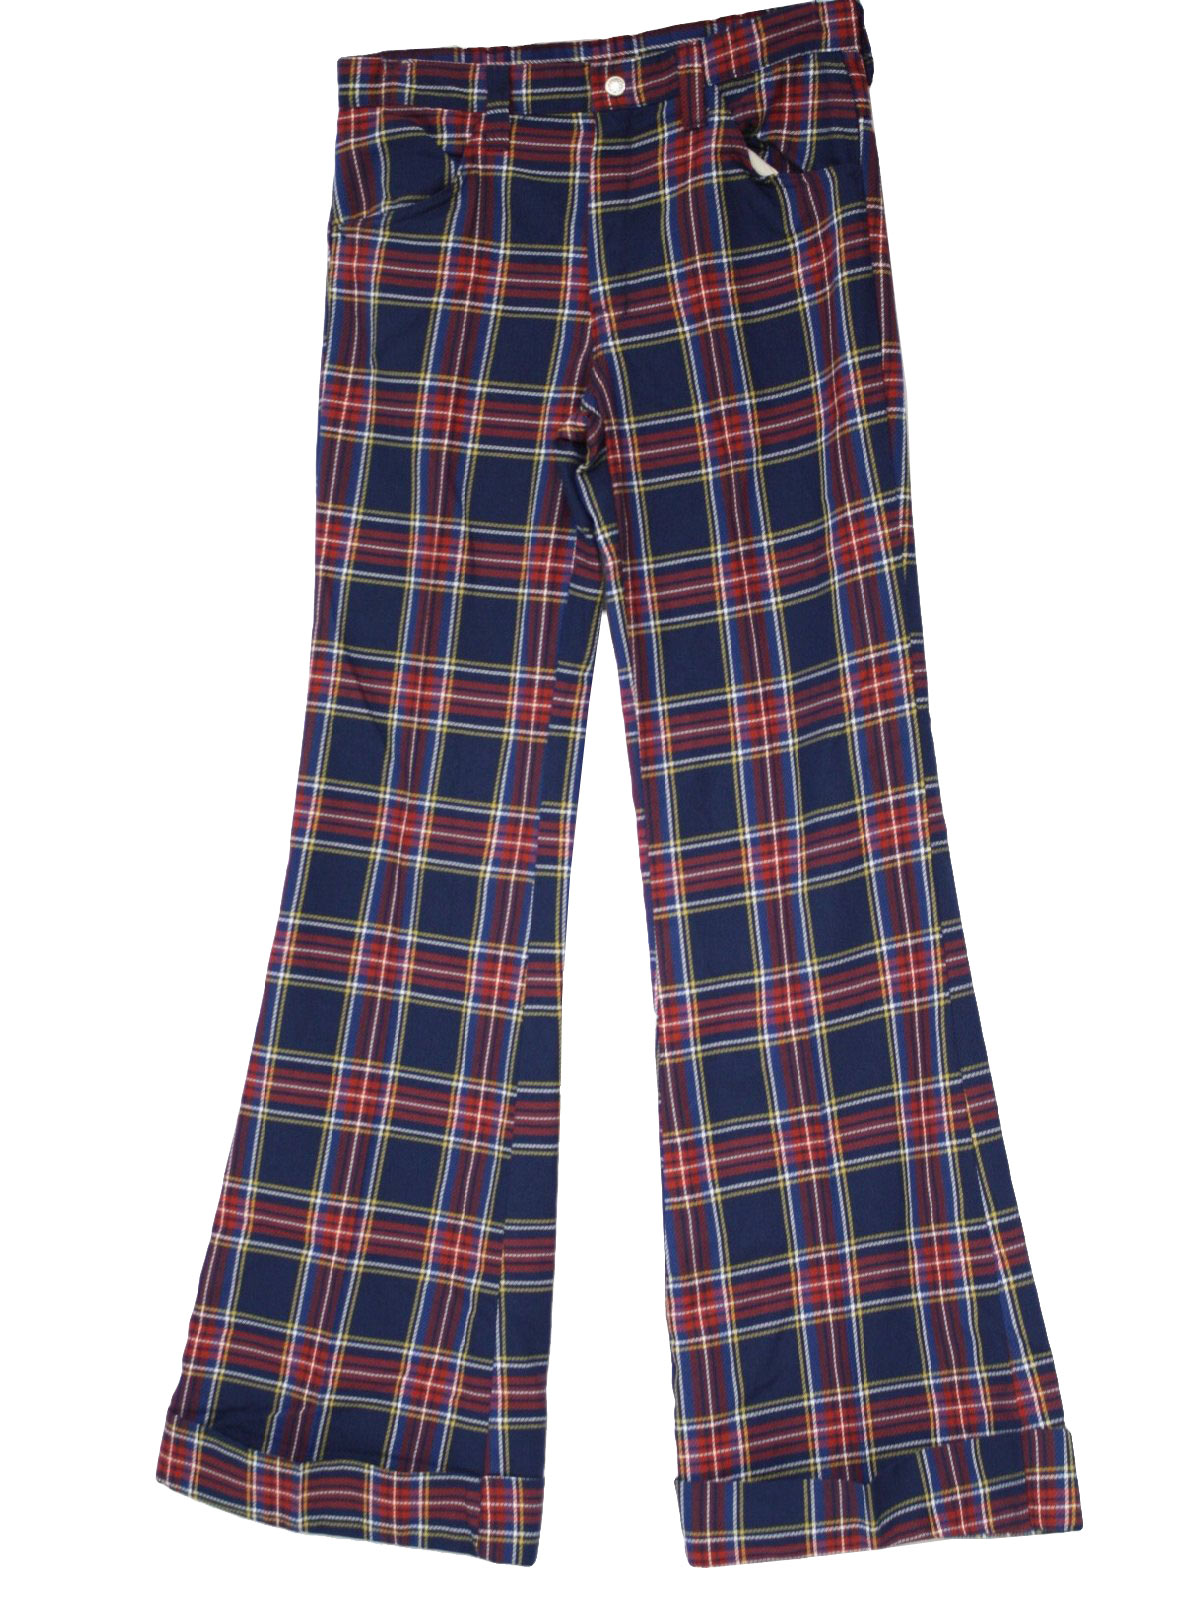 70's Bellbottom Pants: 70s -no label- Mens navy blue, red, gold and ...